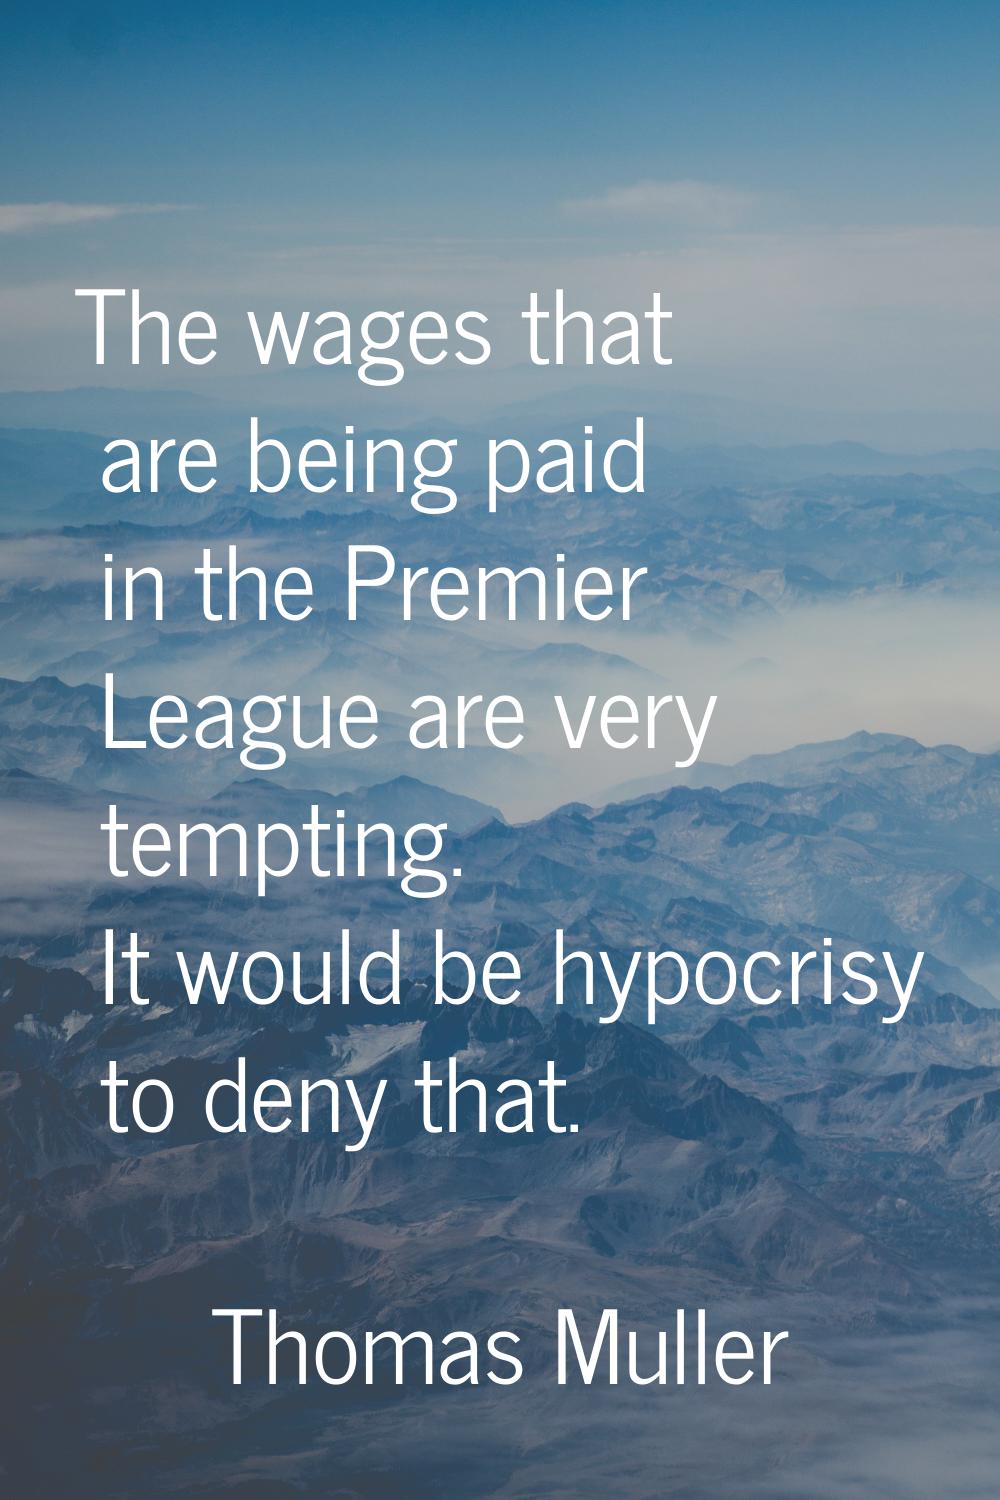 The wages that are being paid in the Premier League are very tempting. It would be hypocrisy to den